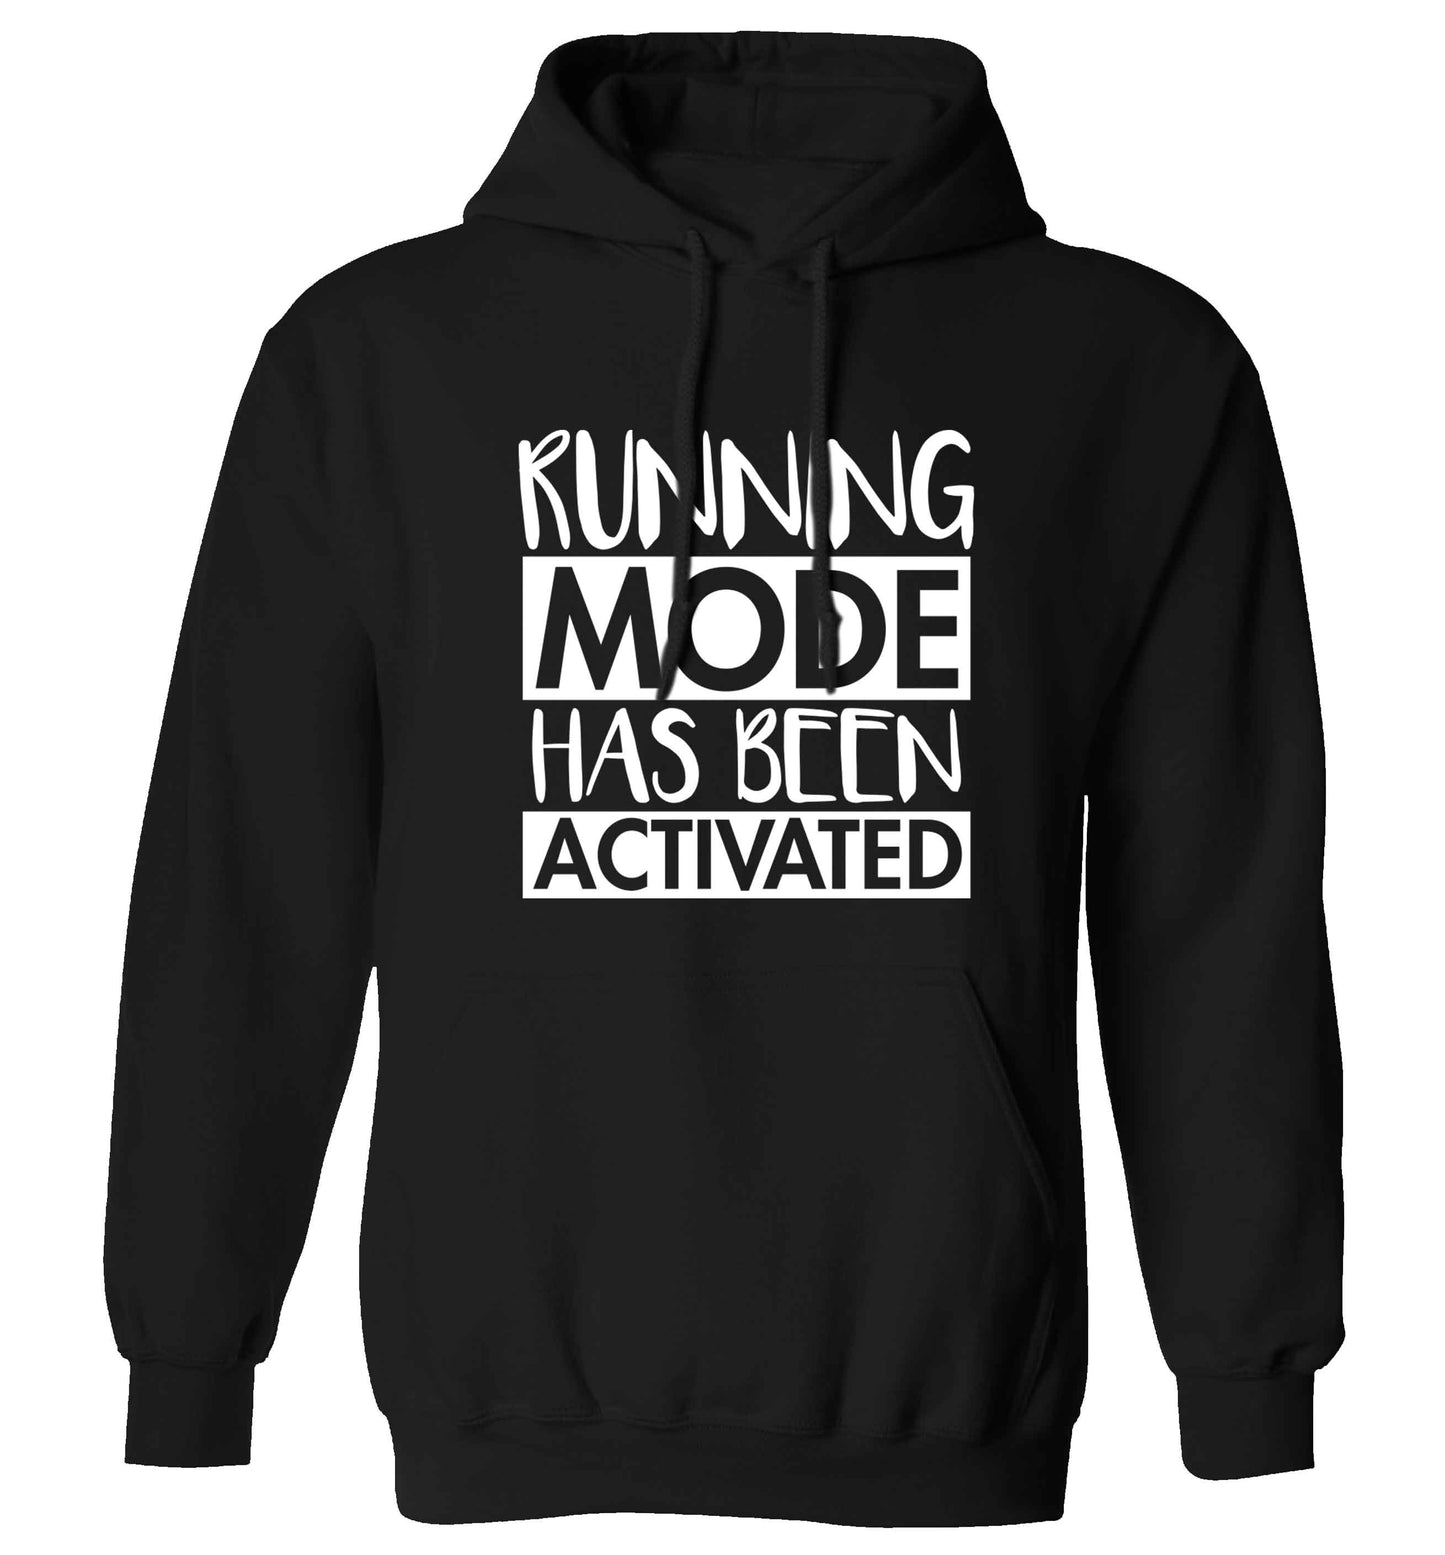 Running mode has been activated adults unisex black hoodie 2XL